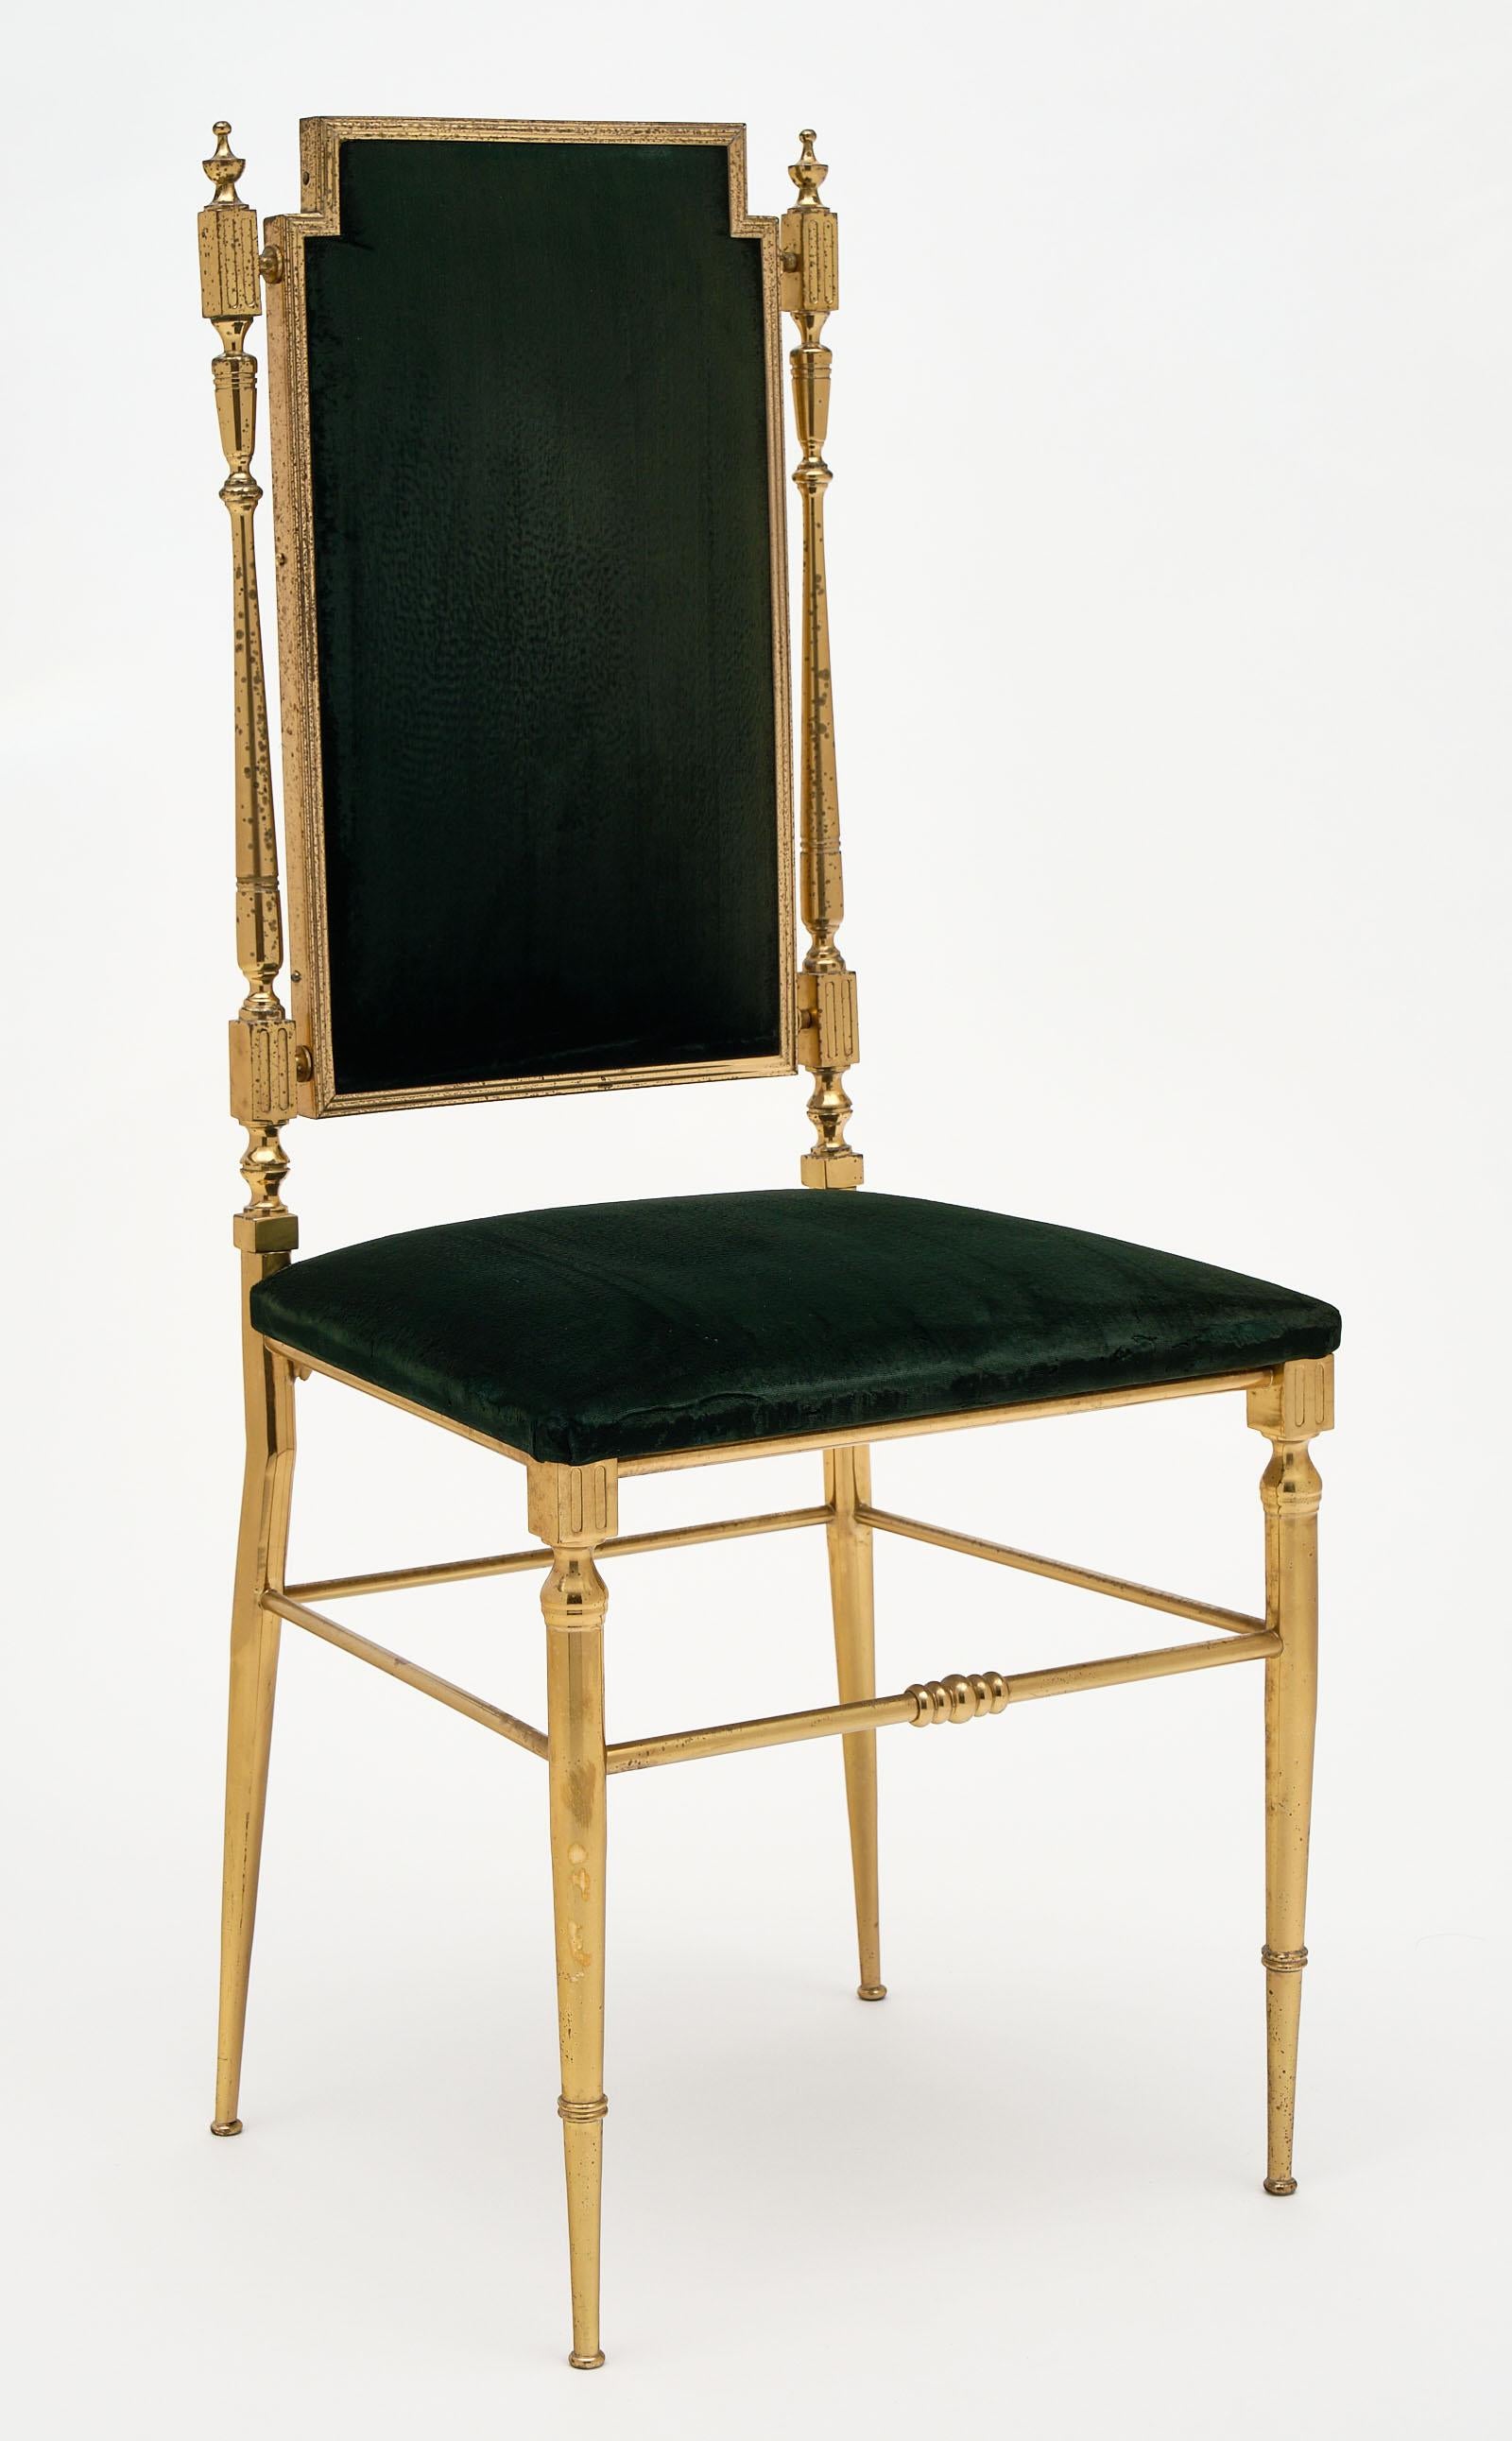 Set of four Chiavari chairs from Italy. We love the finely cast gilt brass frames and the original green velvet upholstery. The upholstery has some wear consistent with use and age.